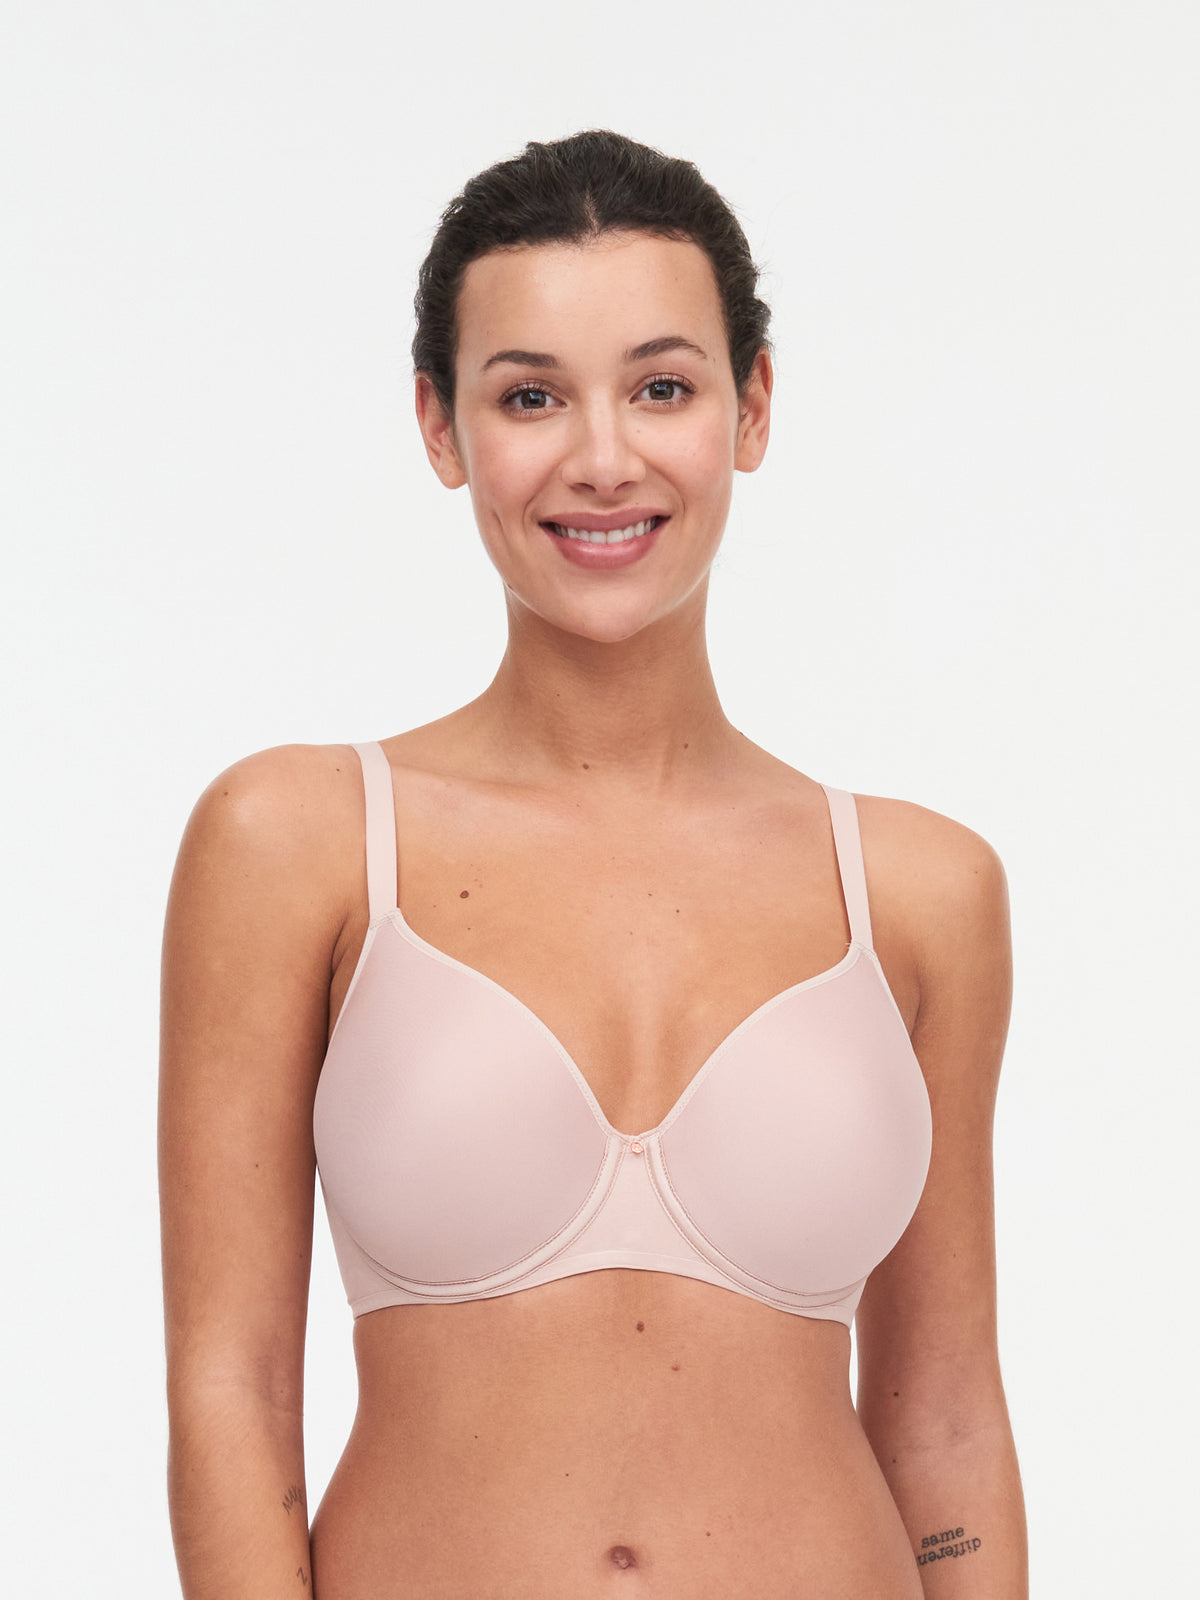 48C Bras  Buy Size 48C Bras at Betty and Belle Lingerie